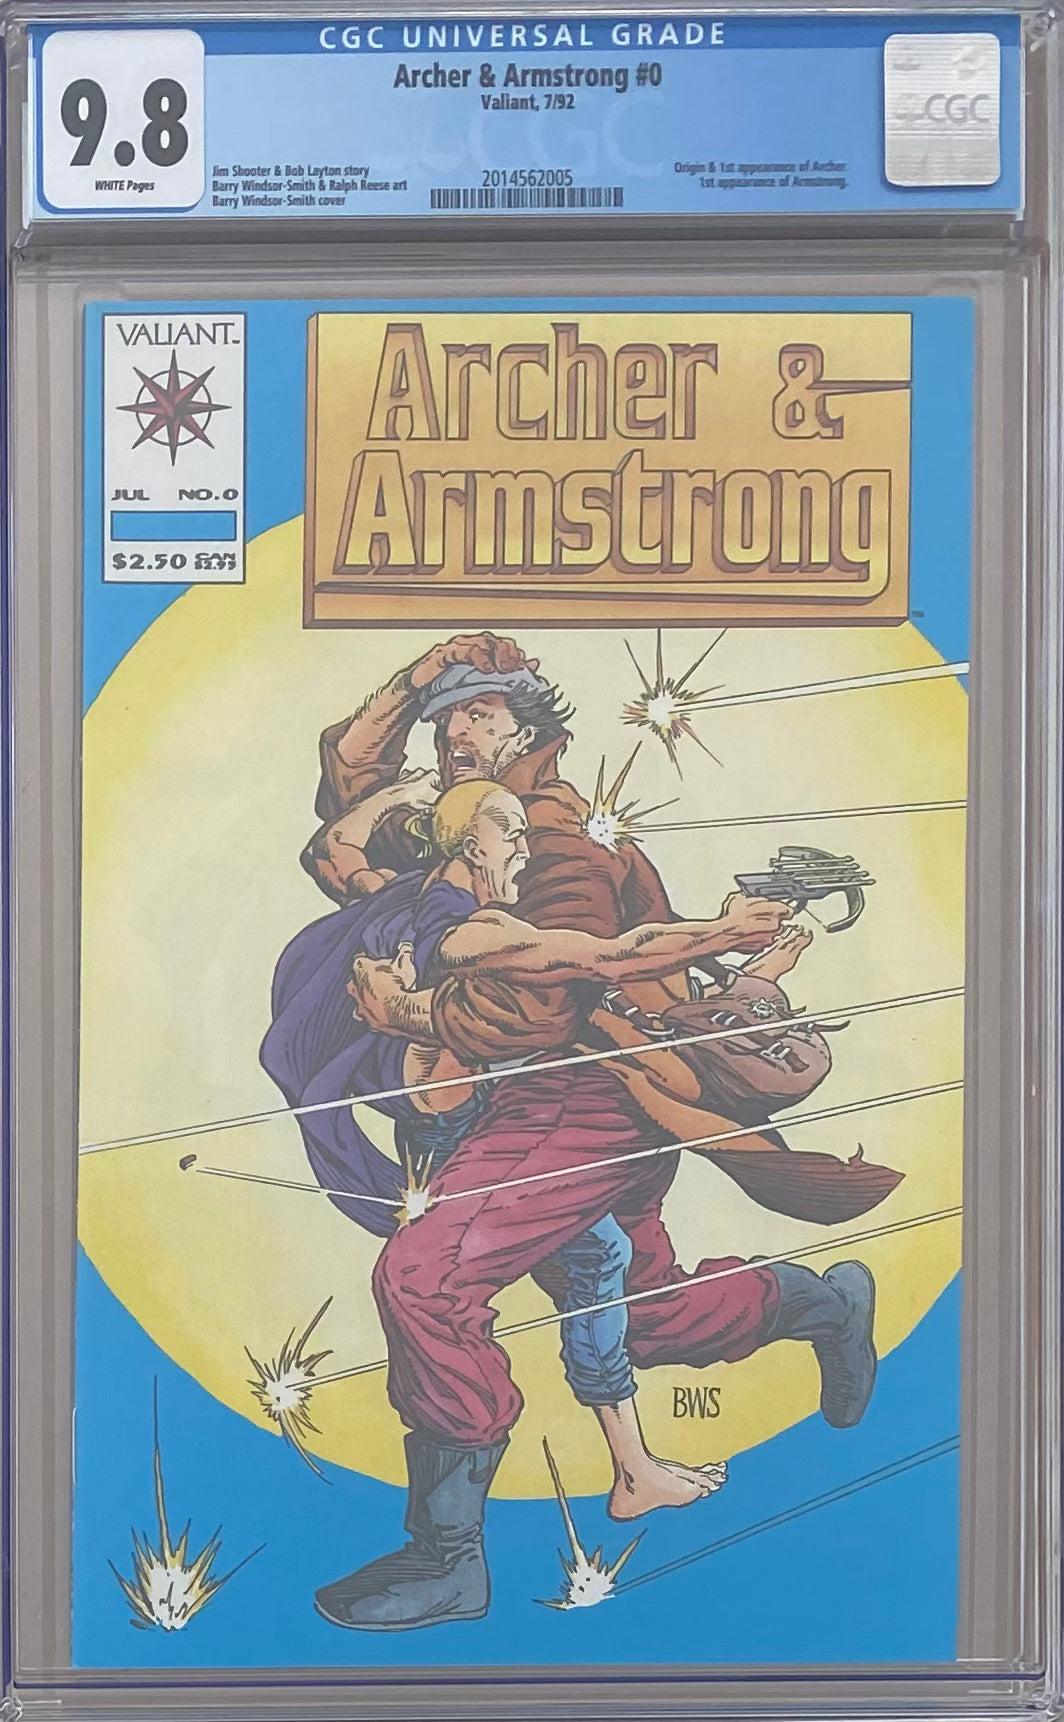 Archer & Armstrong #0 CGC 9.8